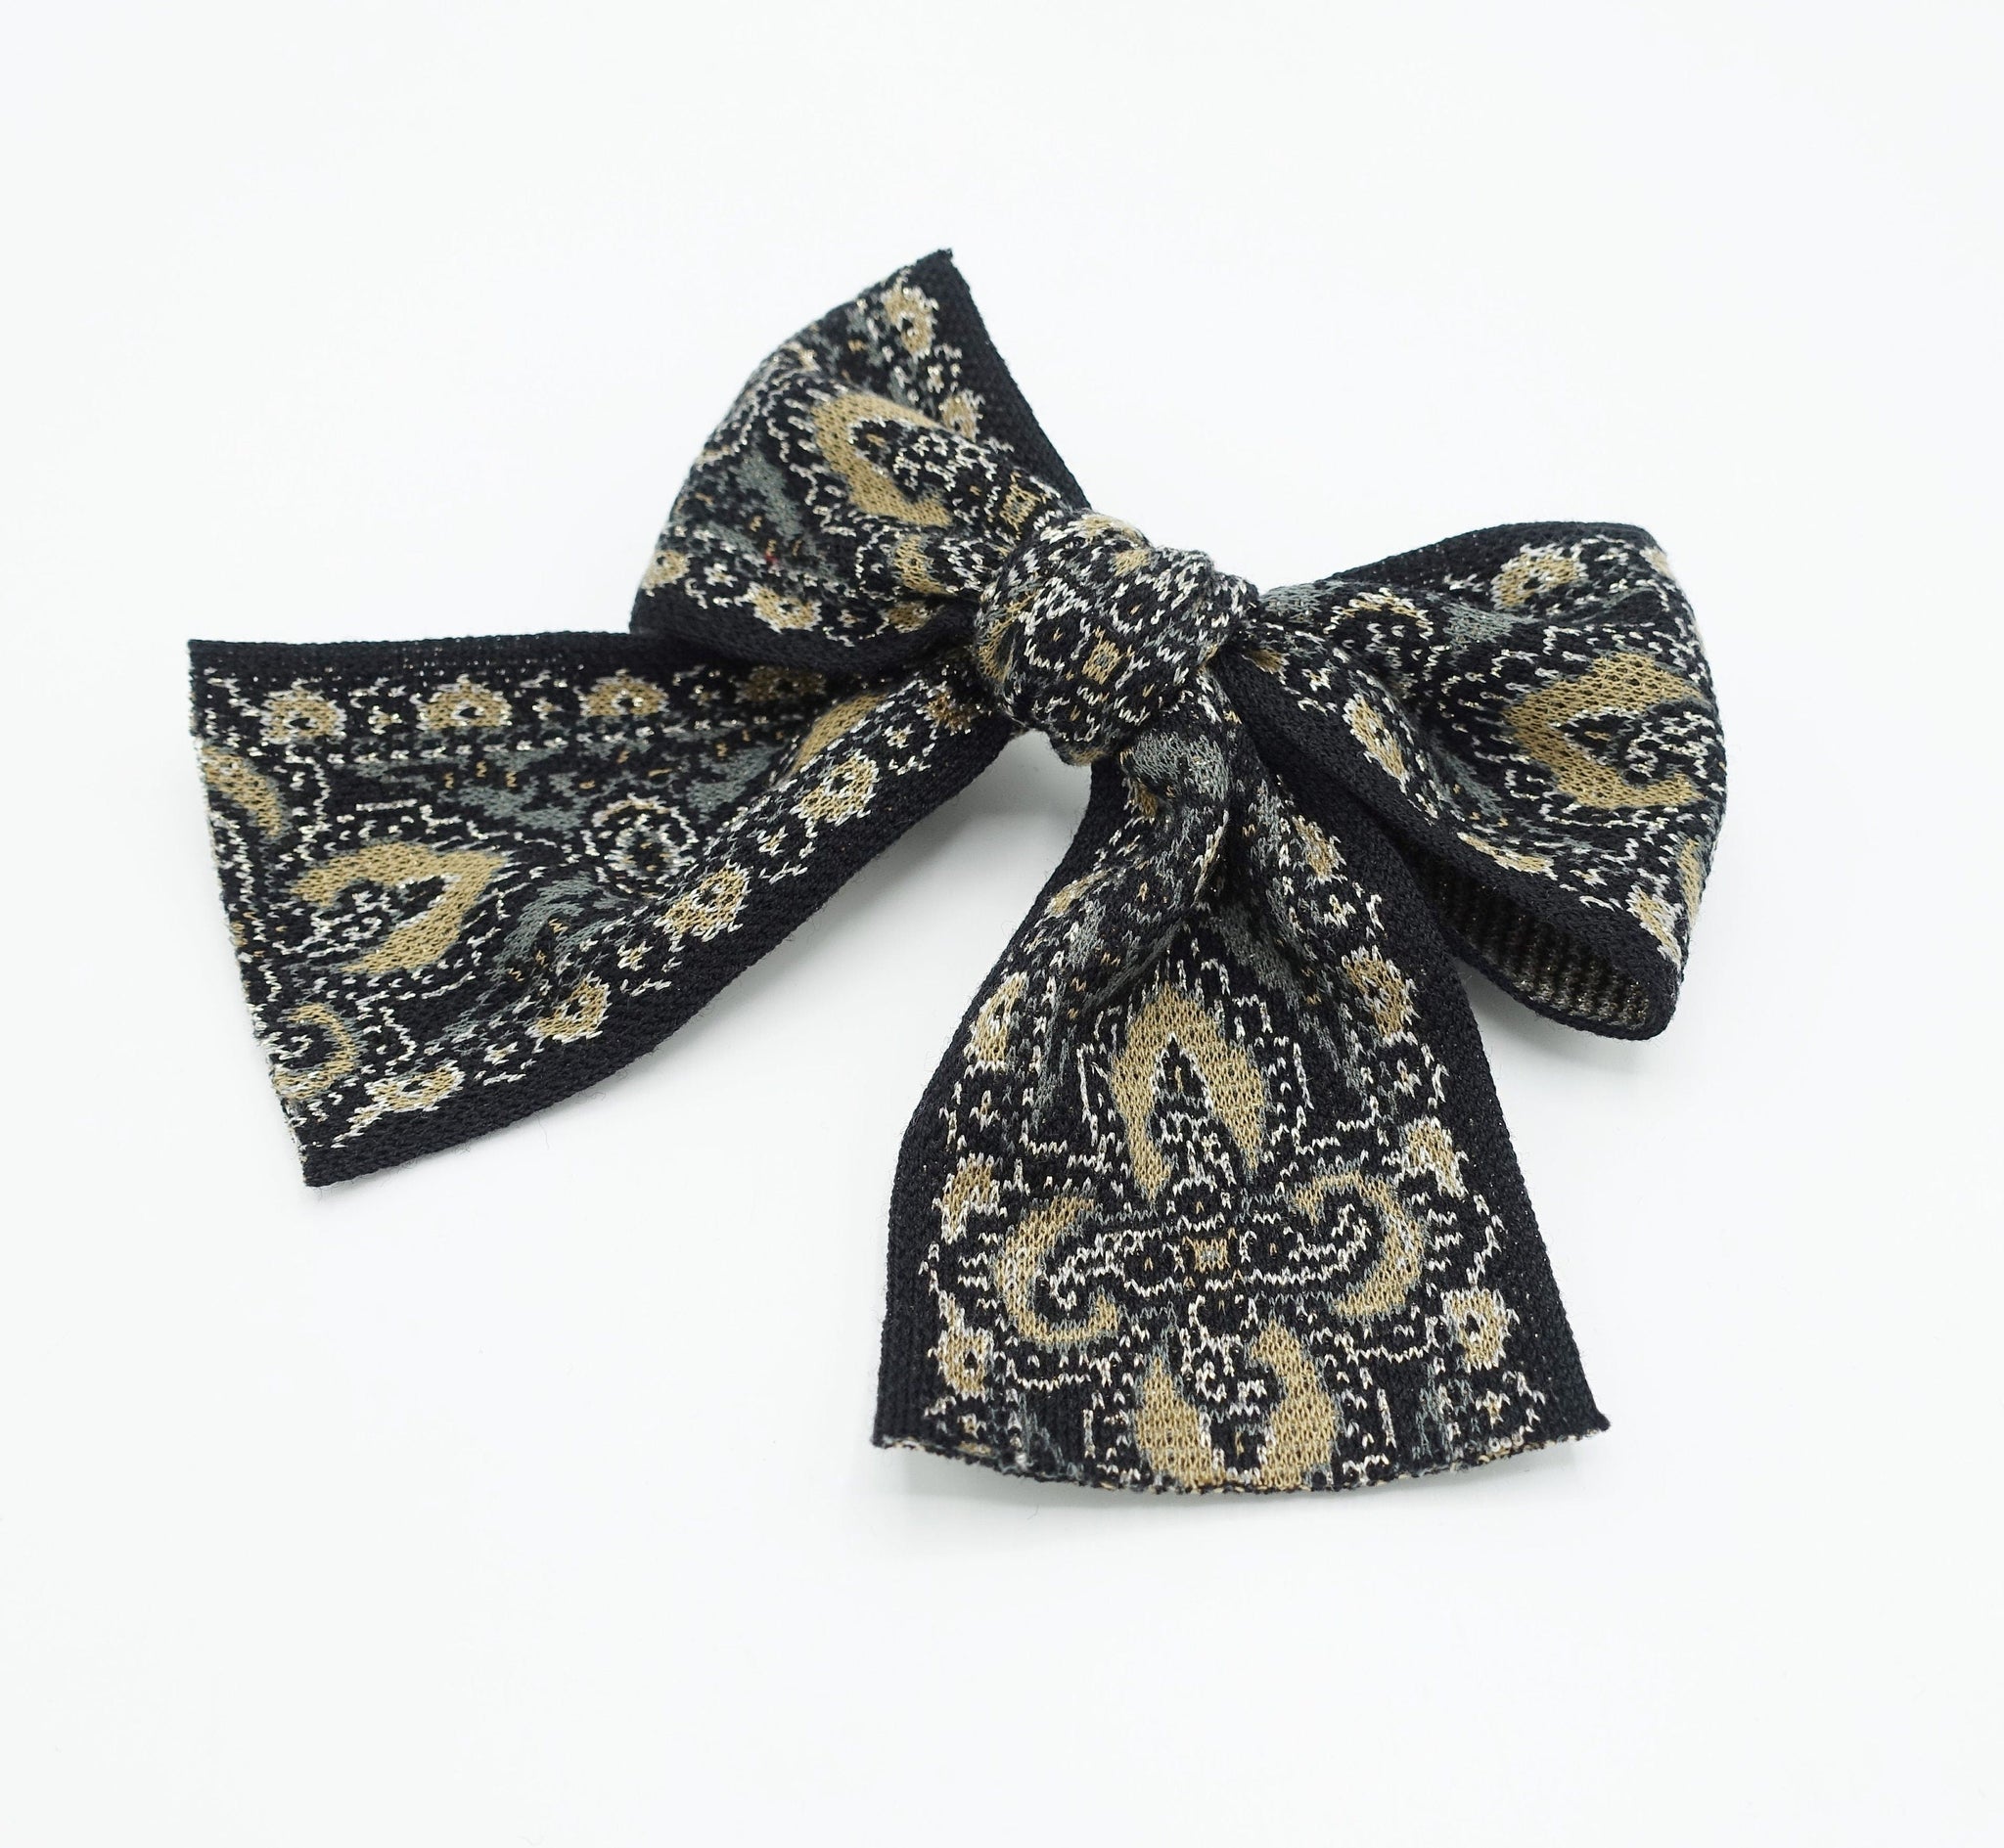 veryshine.com Barrette (Bow) baroque jacquard bow antique style pattern knit Fall Winter hair accessory for women